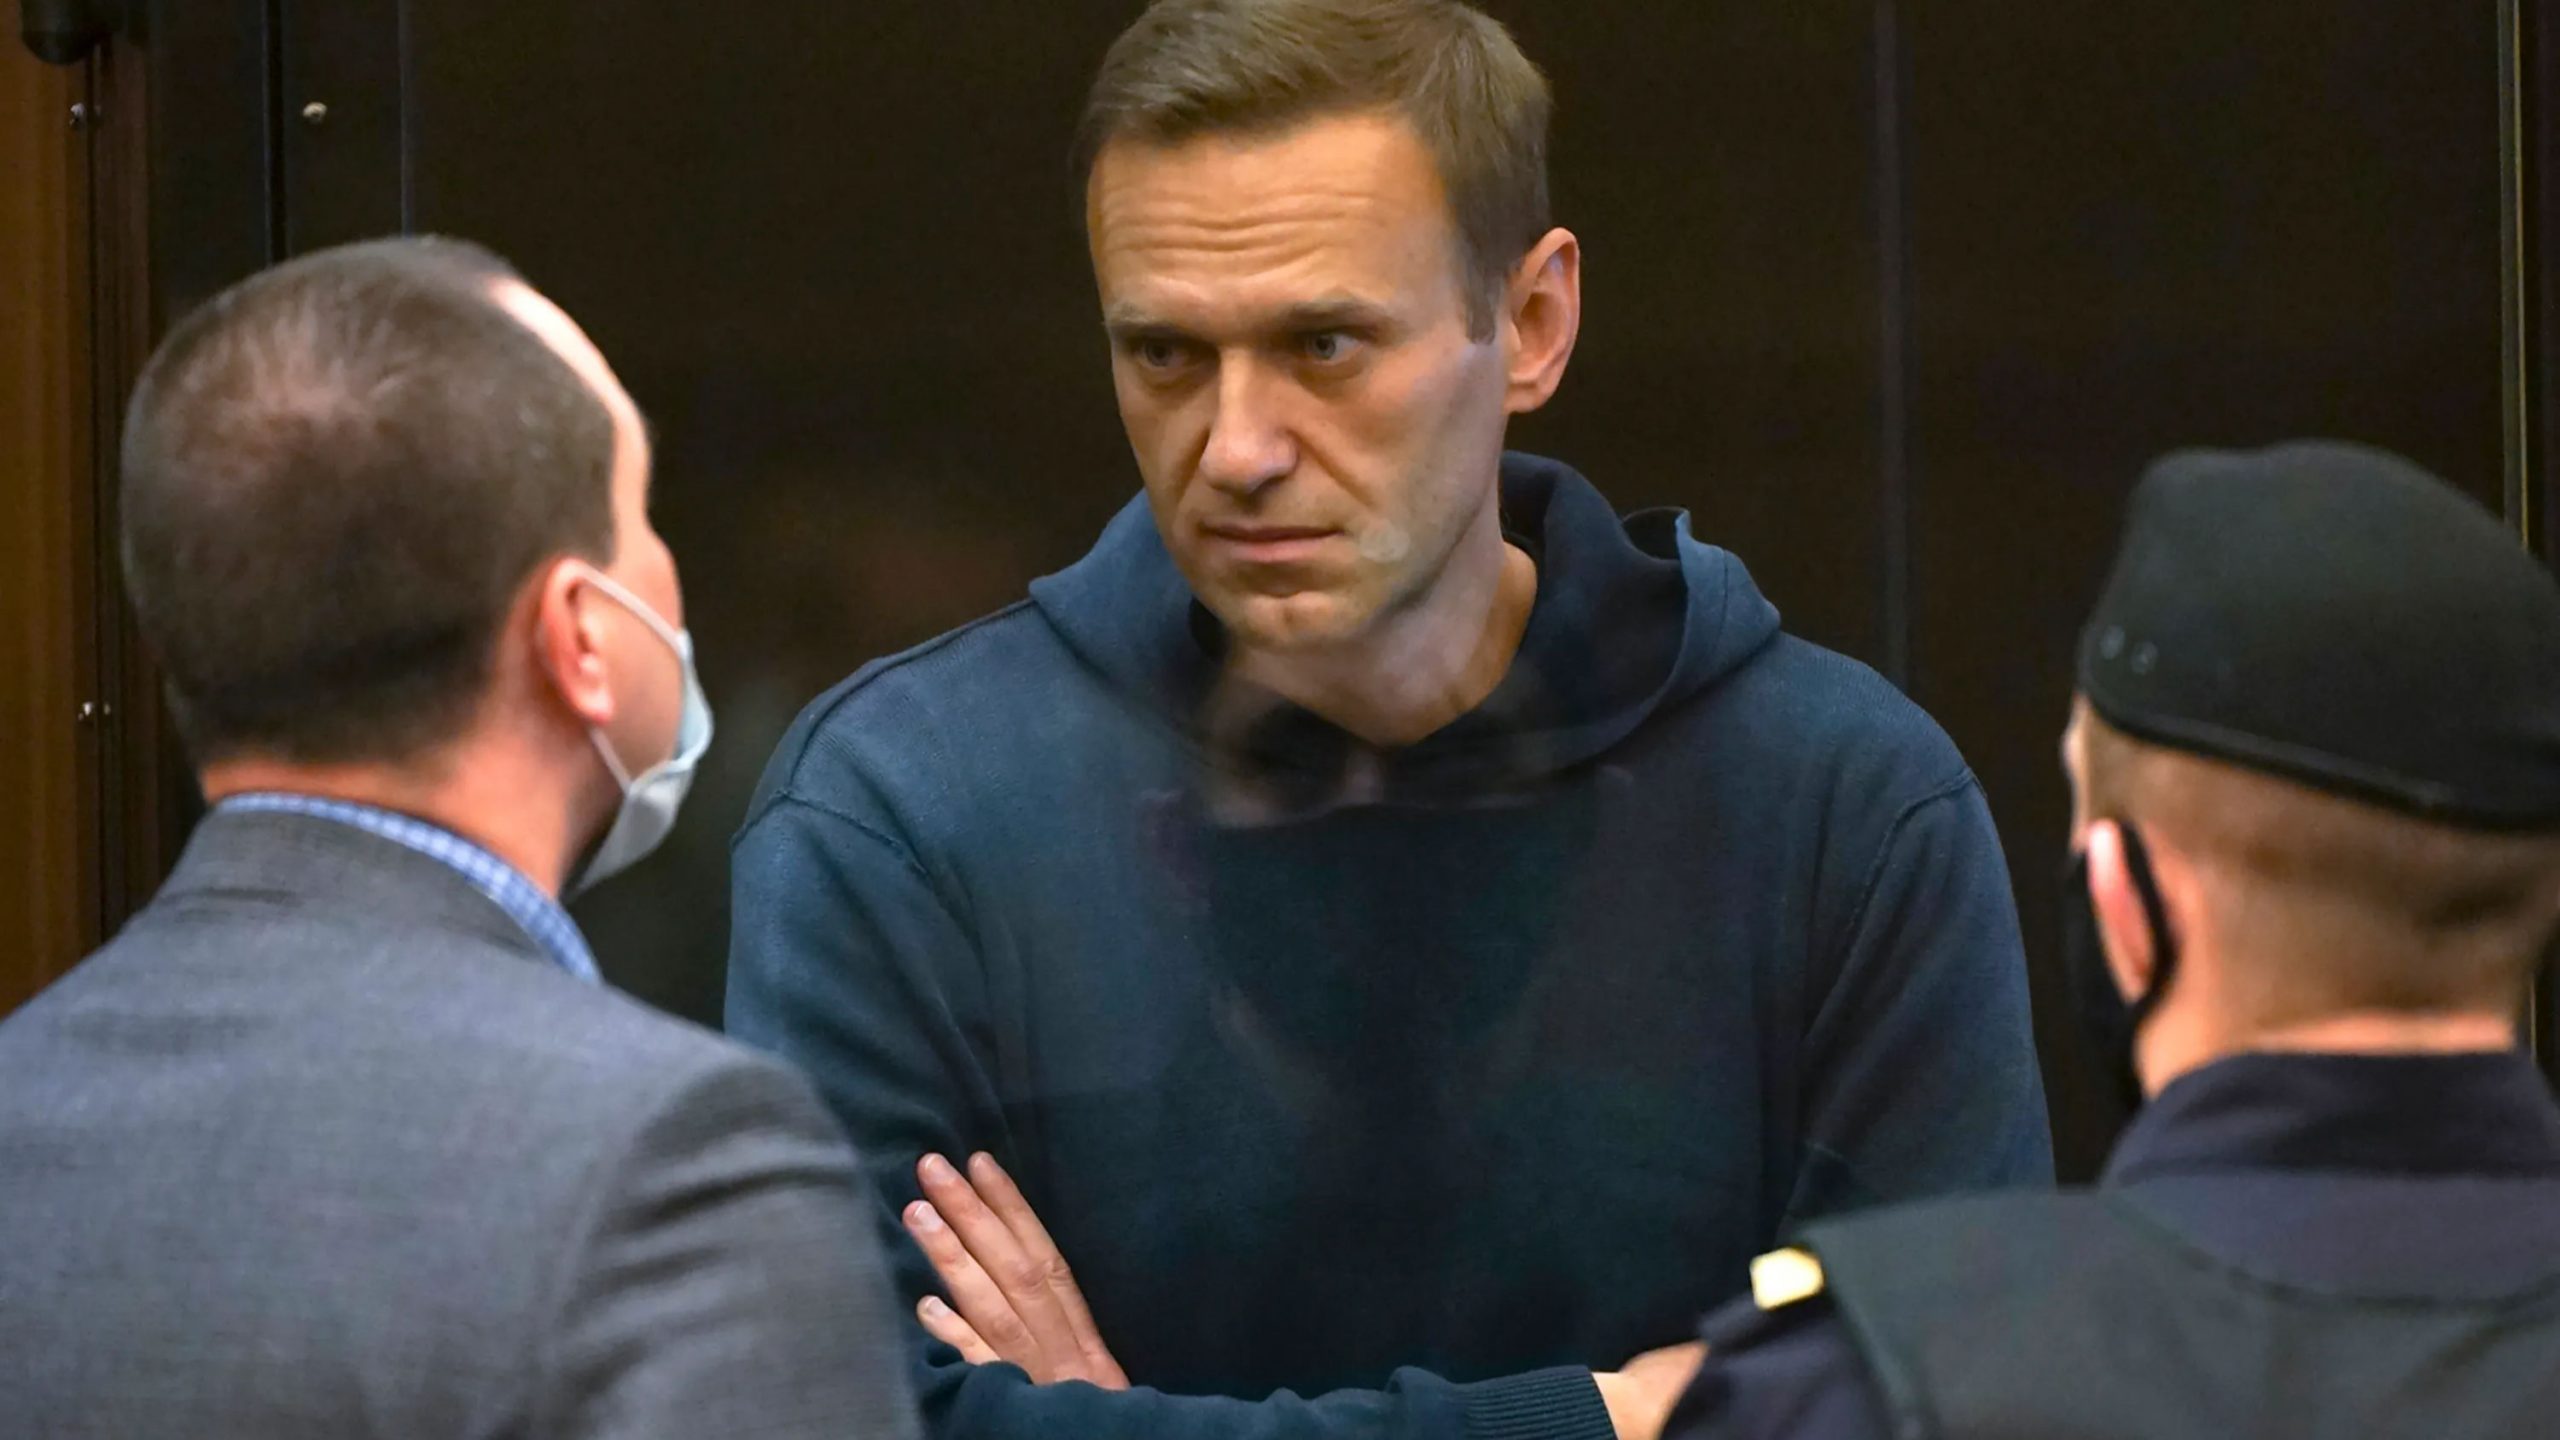 Alexei Navalny’s life in danger, needs to be evacuated: UN Rights Experts